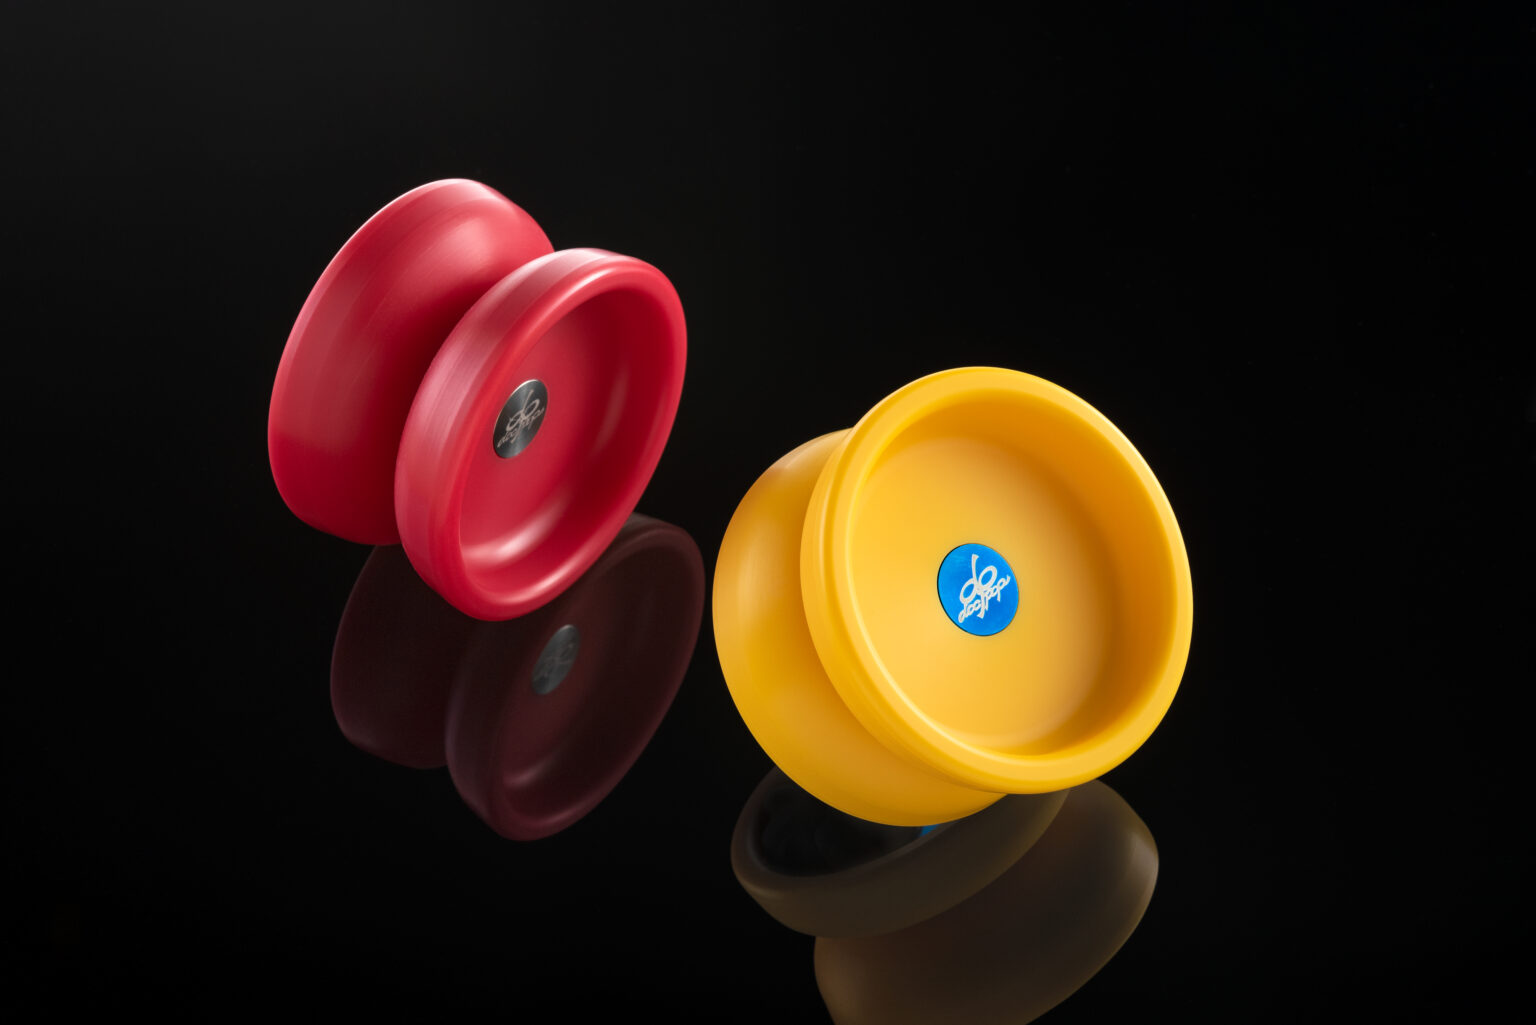 Two Thing Yo-yos, one is yellow and the other is red. They both appear to be floating in black space.